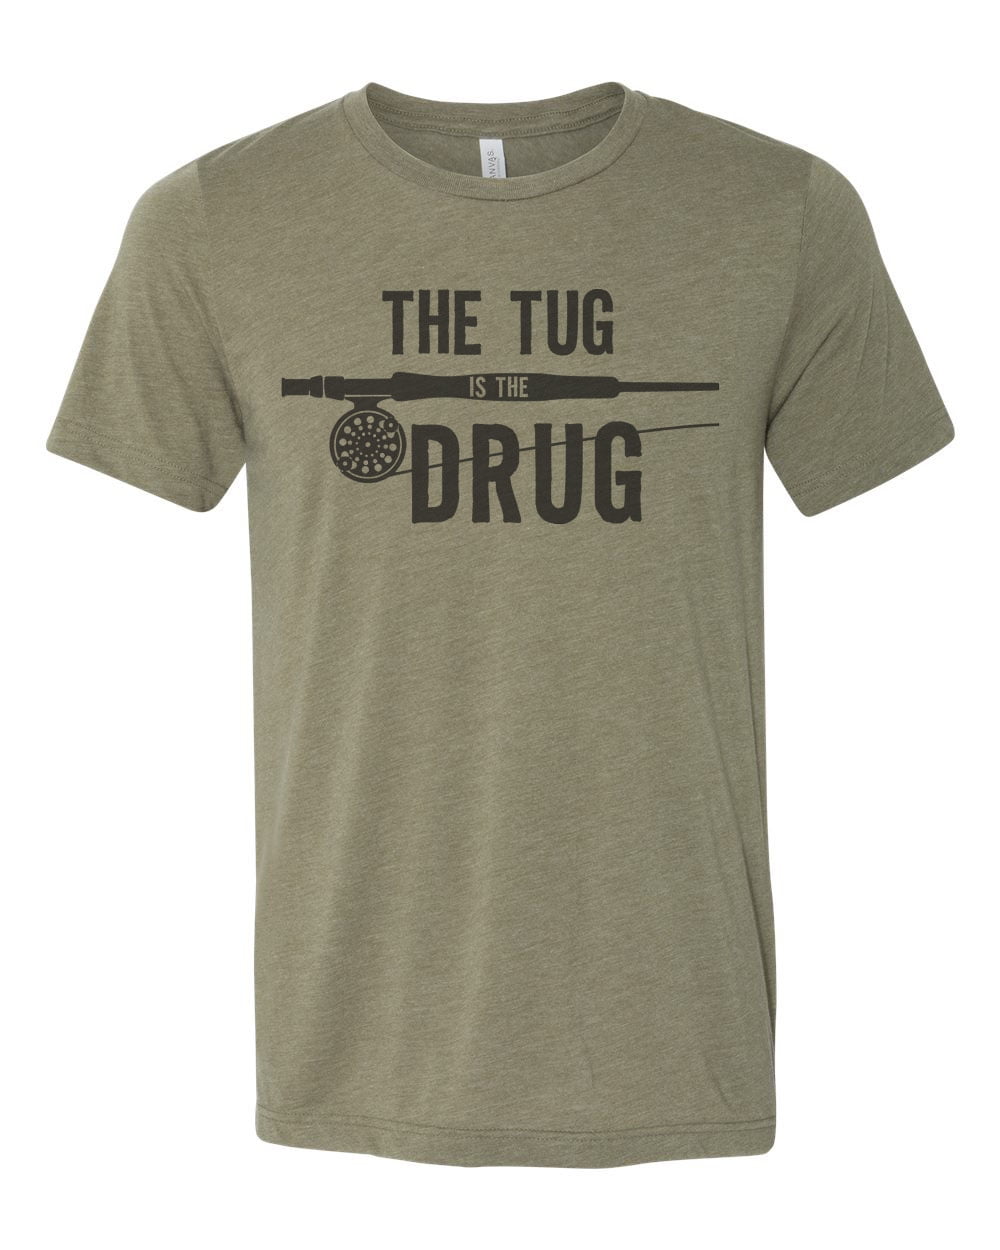 Fishing Shirt, The Tug Is The Drug, Fly Fishing Apparel, Trout Fish Tshirt, Fishing  Shirt For Men, Trendy Fishing T, Fly Fishing Clothes, Heather Olive, XL 